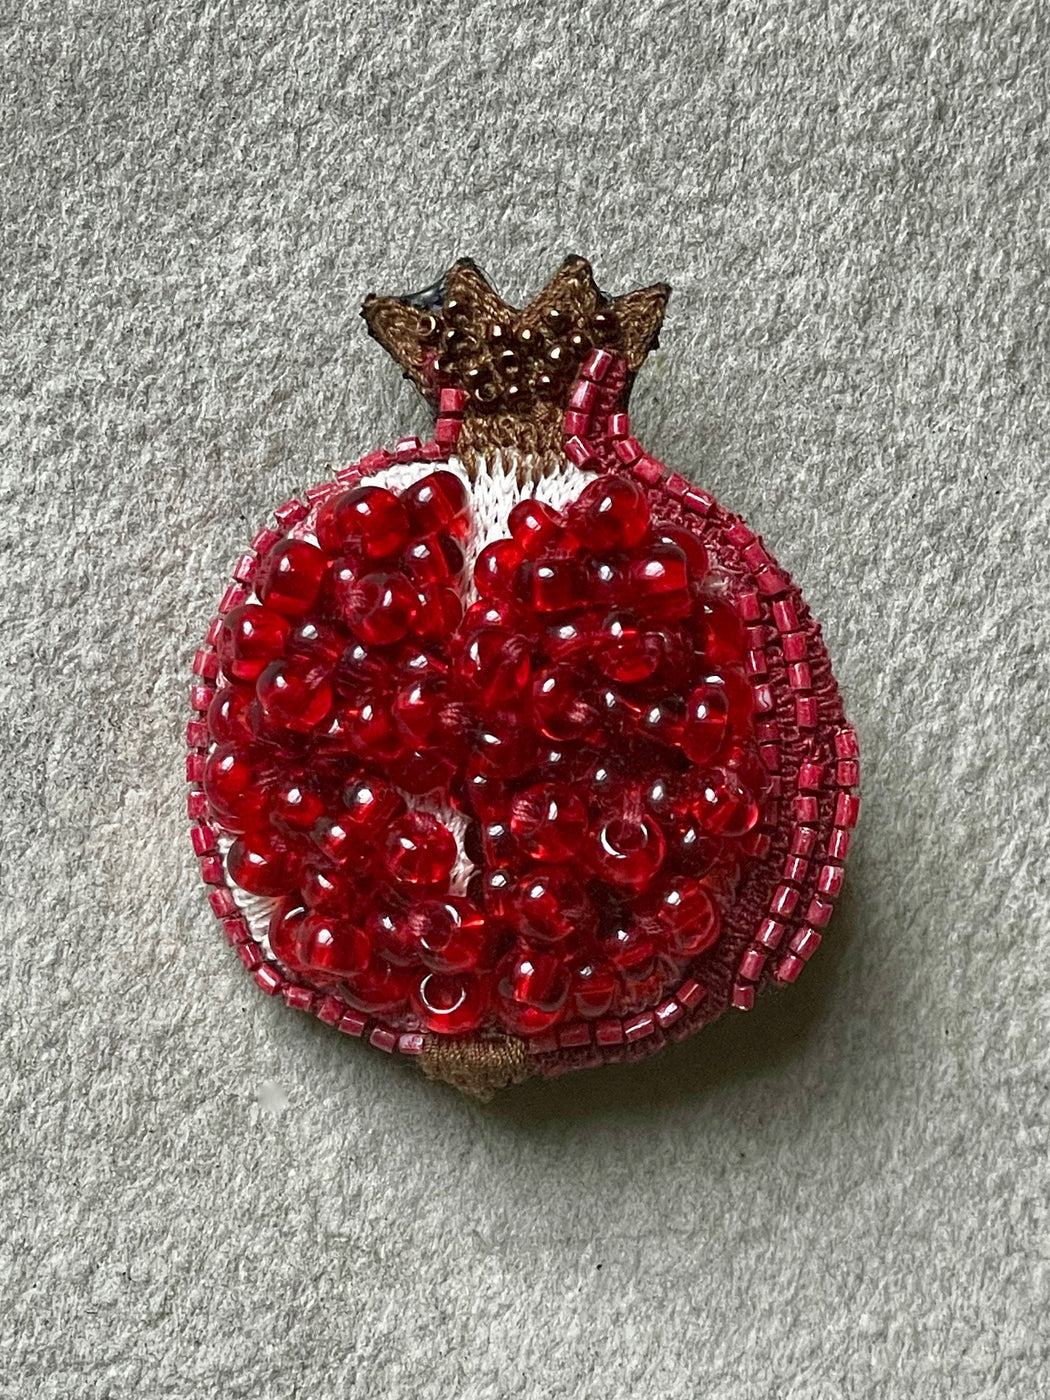 "Pomegranate" Brooch by Trovelore